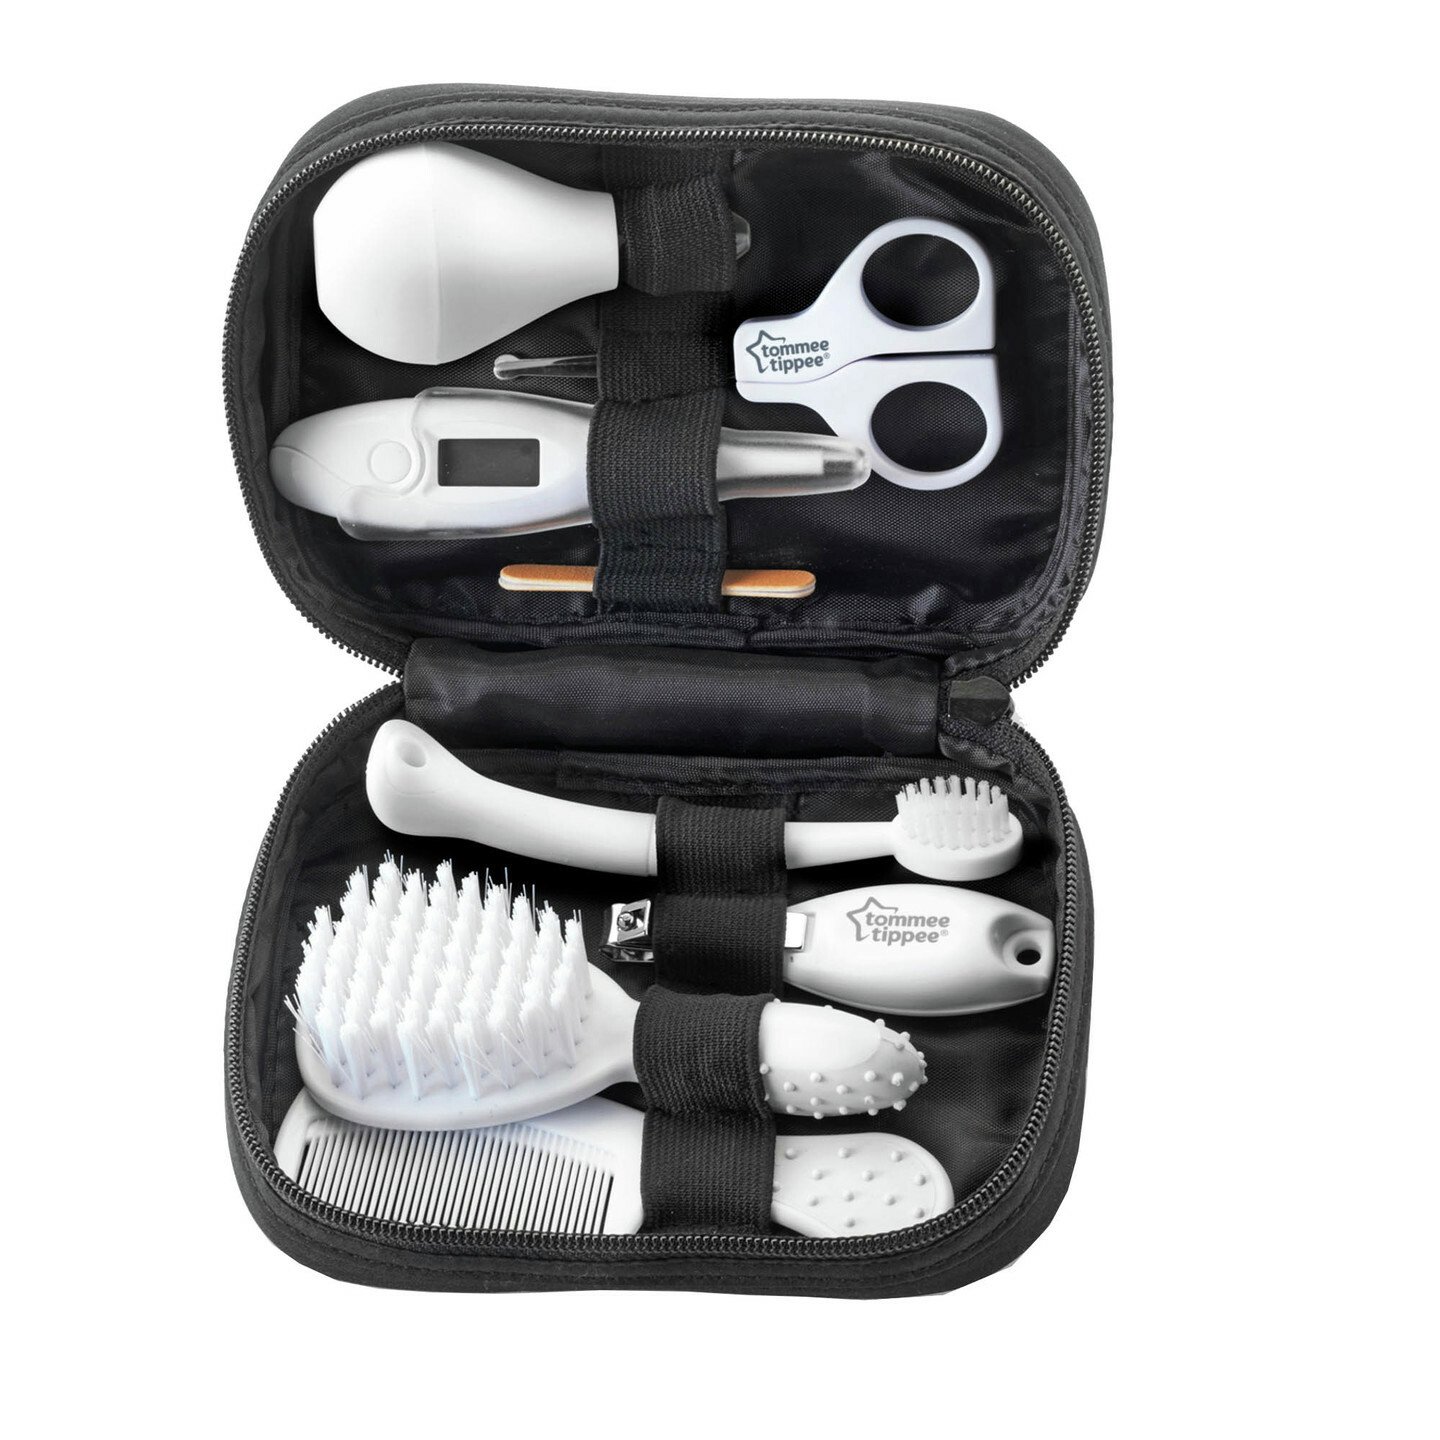 Tommee Tippee Closer to Nature Healthcare and Grooming Kit Review